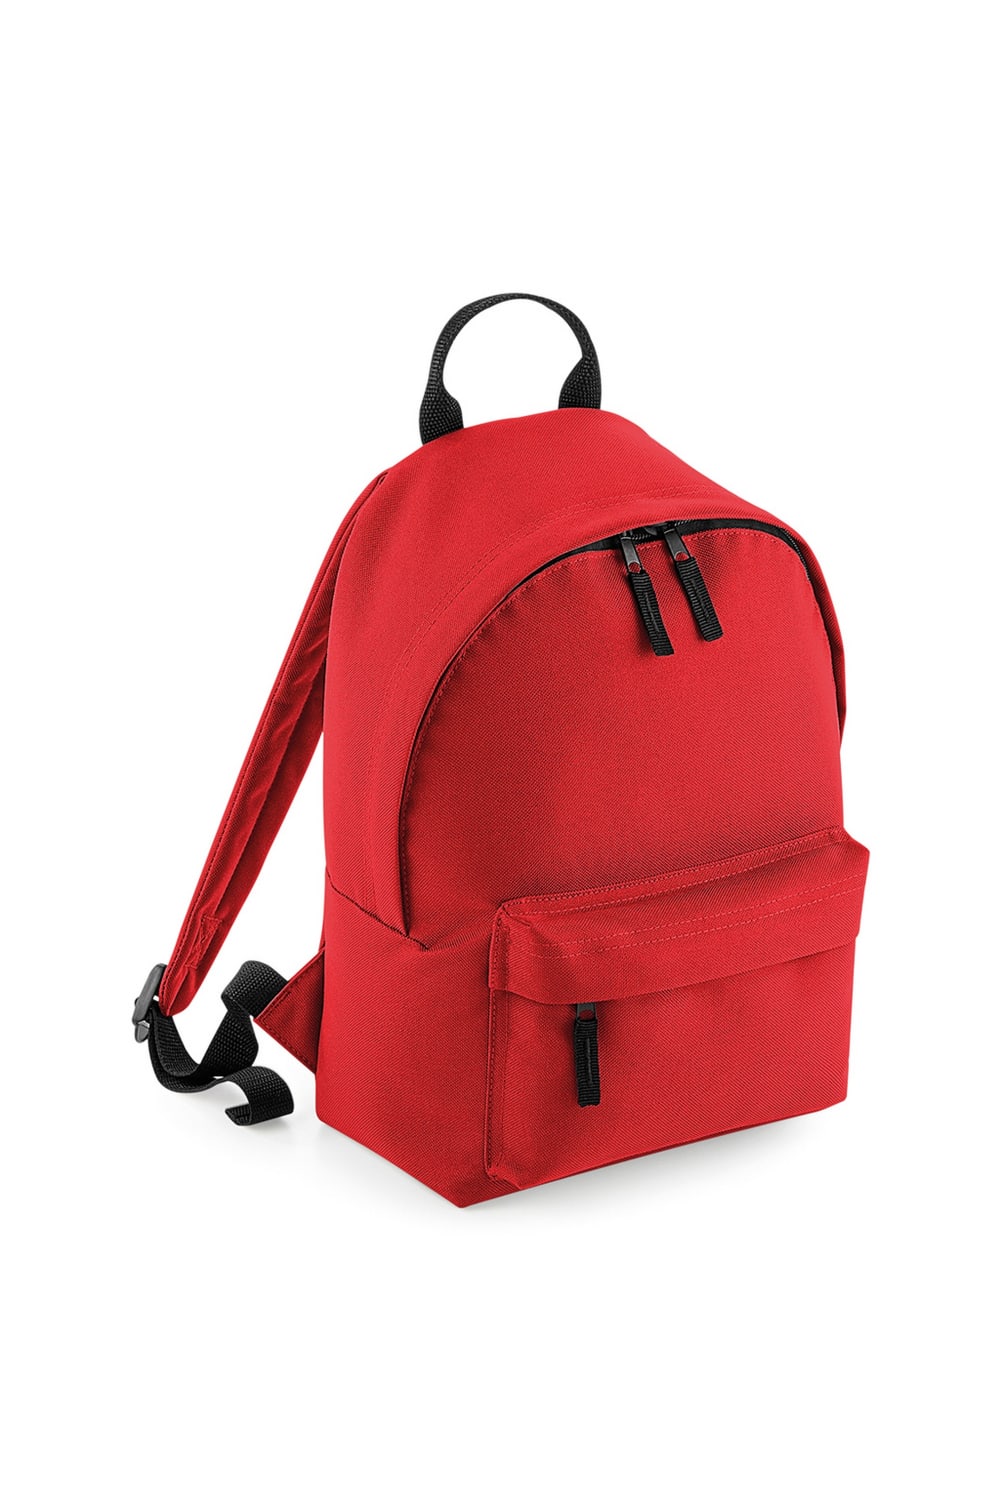 Mini Fashion Backpack - Bright Red